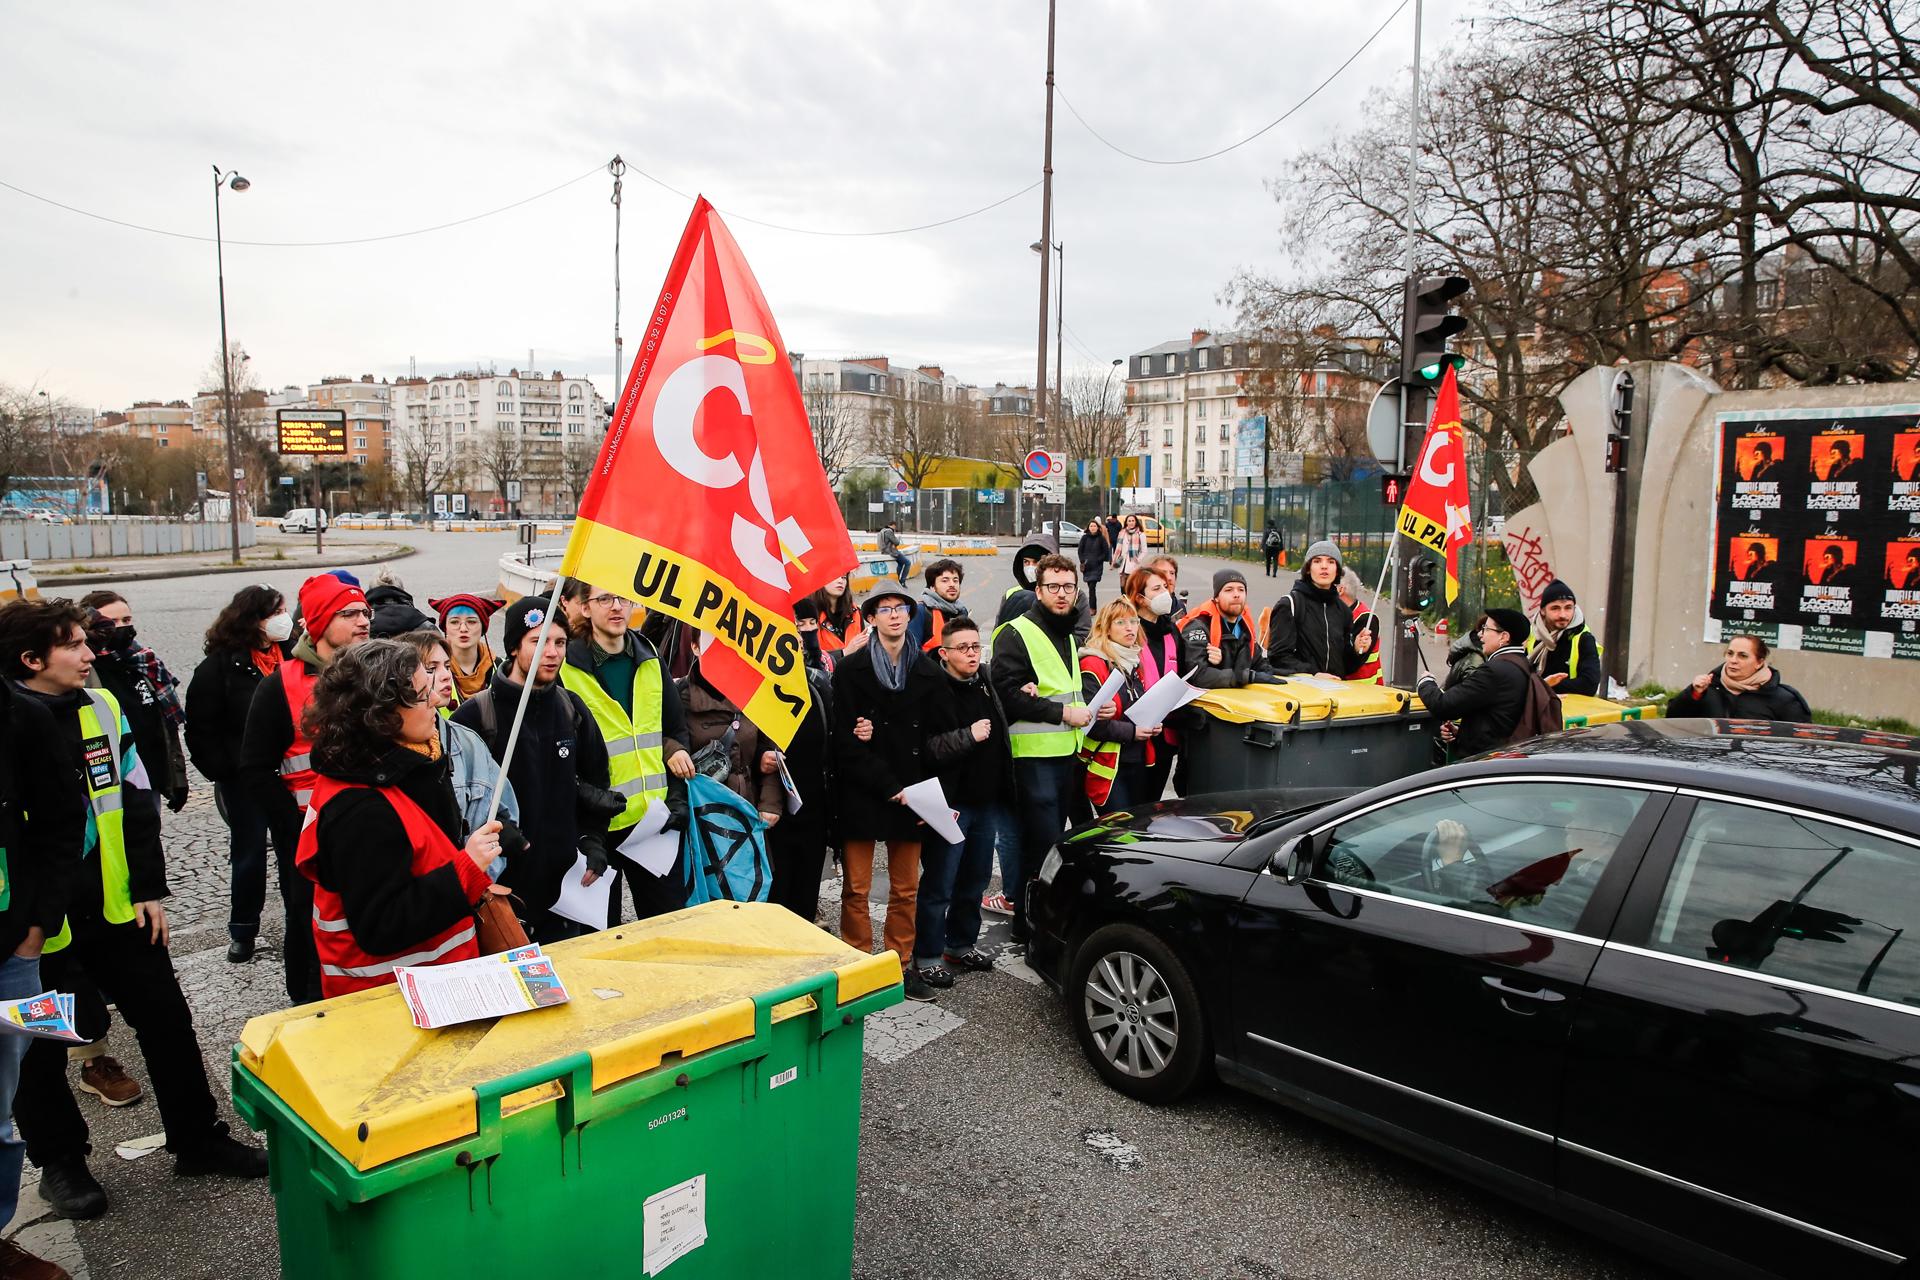 People wave General Confederation of Labour unions (CGT) flags as they block the traffic on Paris' peripheral boulevard in the morning hours to distribute flyers against the French government's pension reform, in Paris, France, 17 March 2023.  EFE/EPA/TERESA SUAREZ